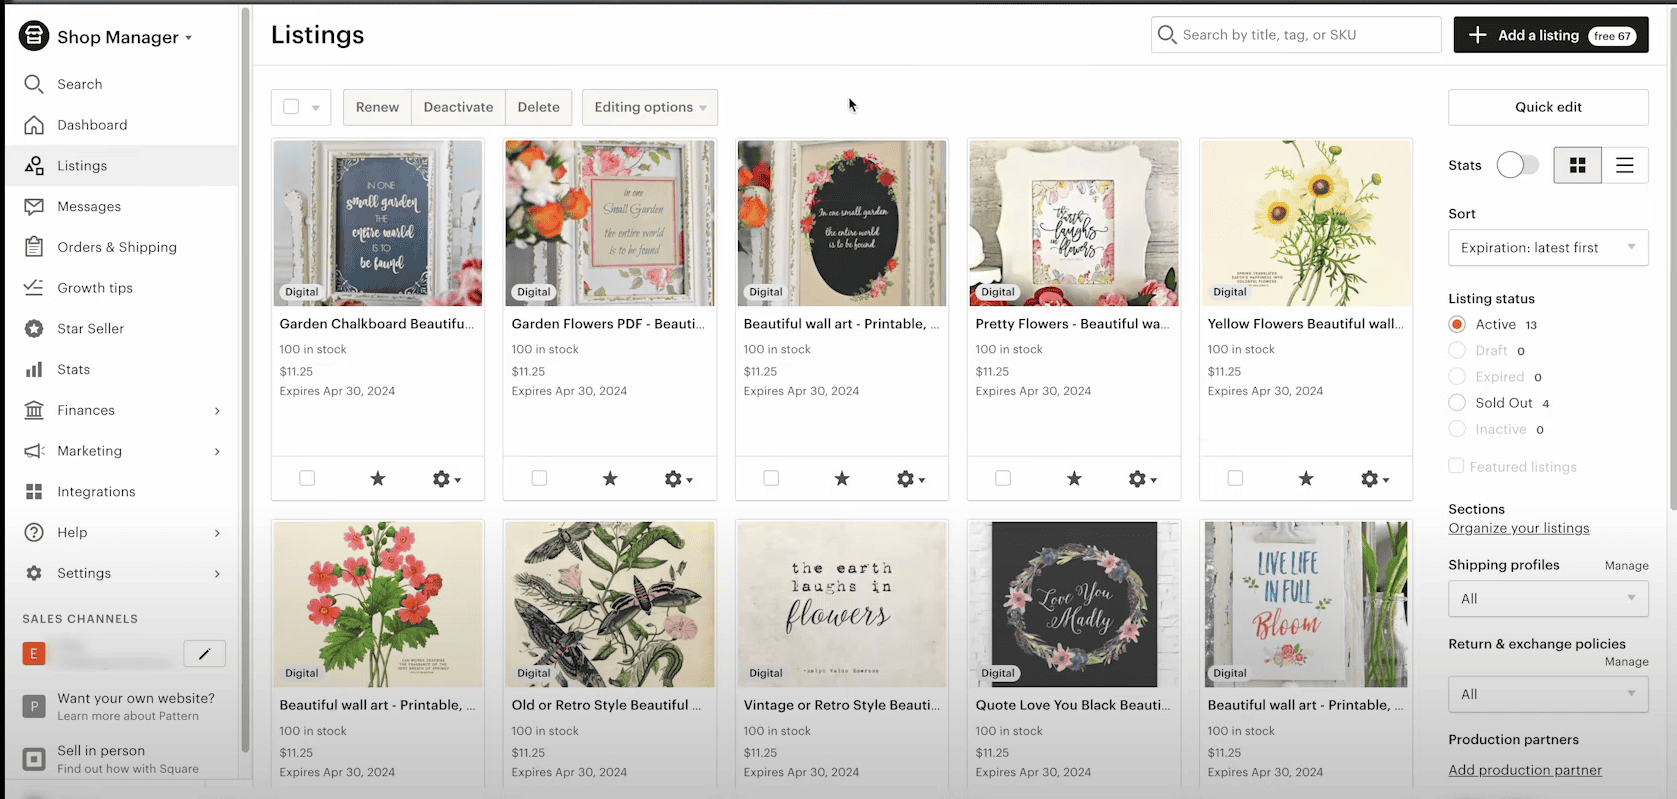 Etsy shop manager listings